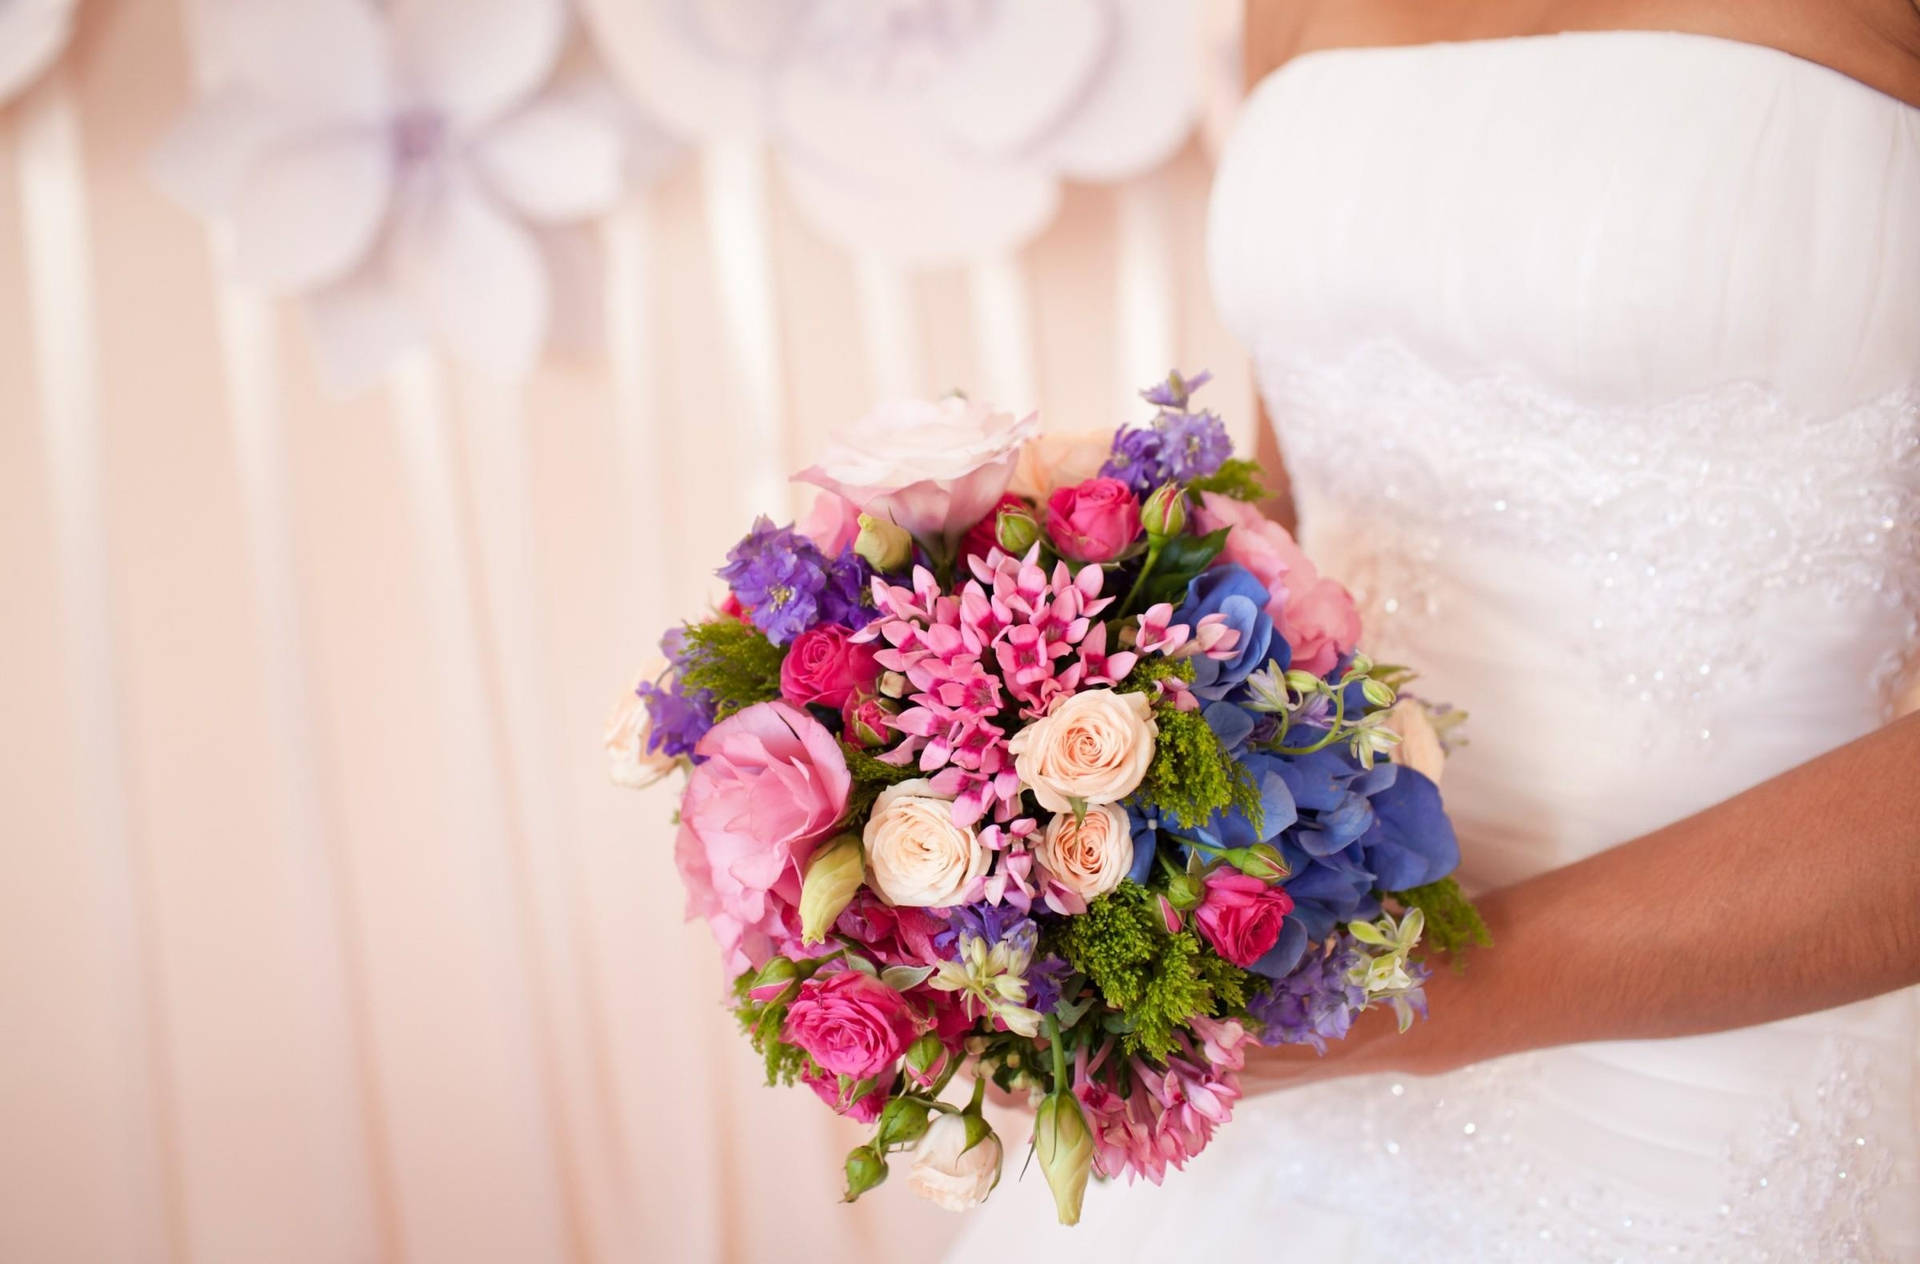 Bride With Colorful Bouquet Of Flowers Background